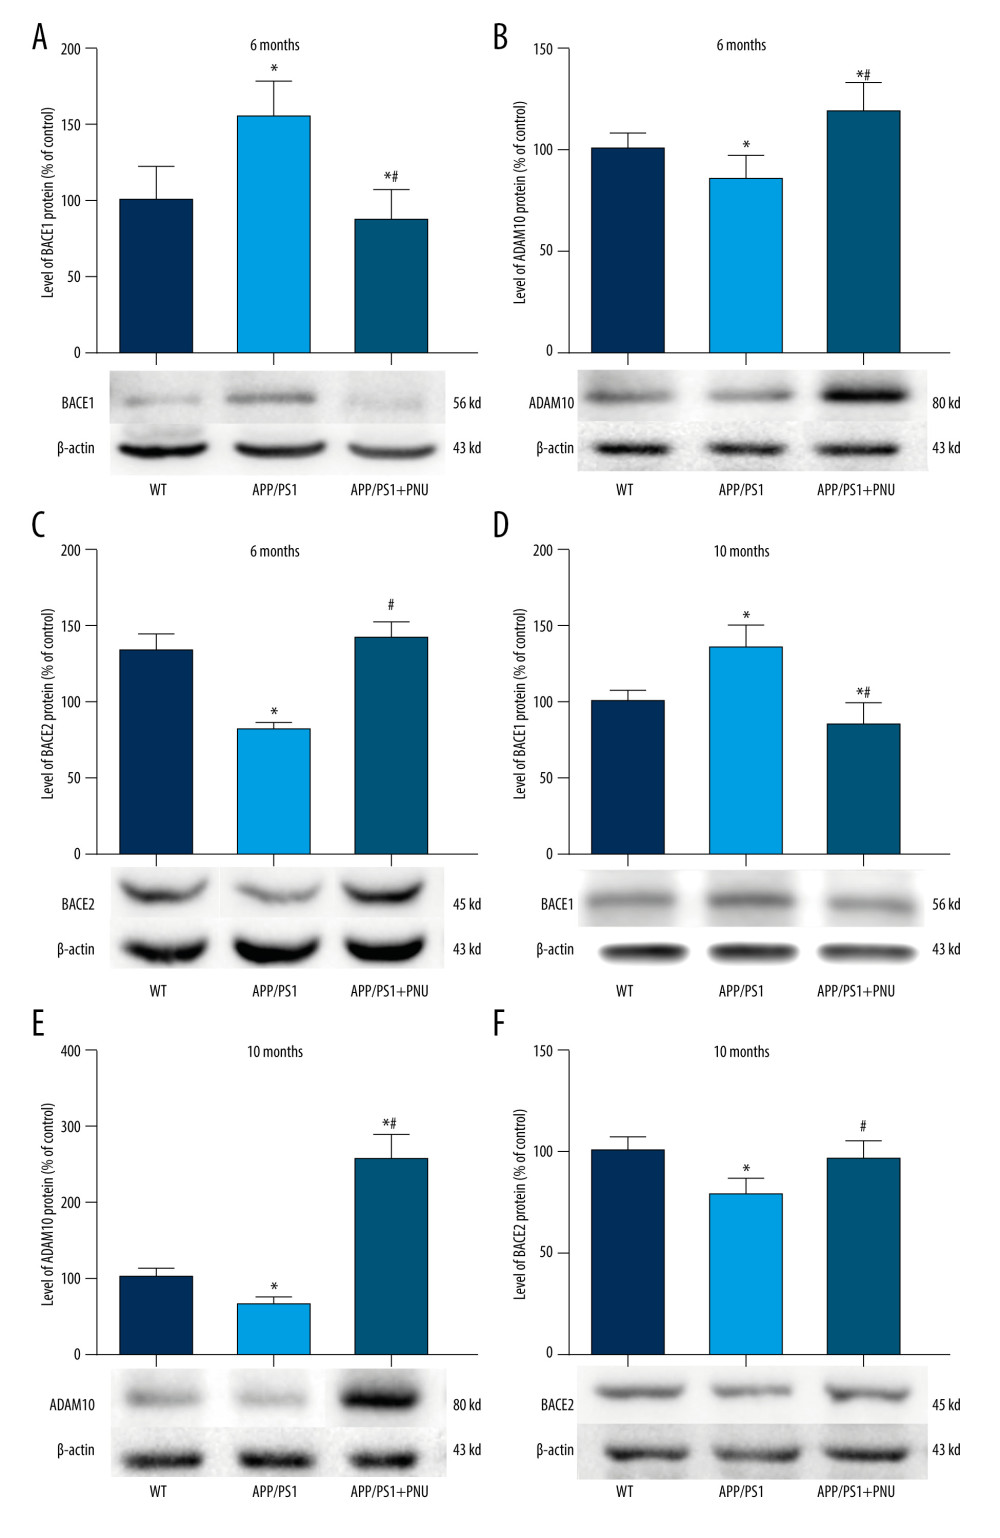 Western blot for BACE1, ADAM10, and BACE2 in the brains of APP/PS1 mice. (A, D) Levels of BACE1 at 6 and 10 months of age. (B, E) Levels of ADAM10 at 6 and 10 months of age. (C, F) Levels of BACE2 at 6 and 10 months of age. The values presented are means±SD of n=10 mice. * P<0.05 compared to the wild-type (WT) group; # P<0.05 compared to the APP/PS1 group, as determined by analysis of variance (ANOVA), followed by the Tukey HSD test.